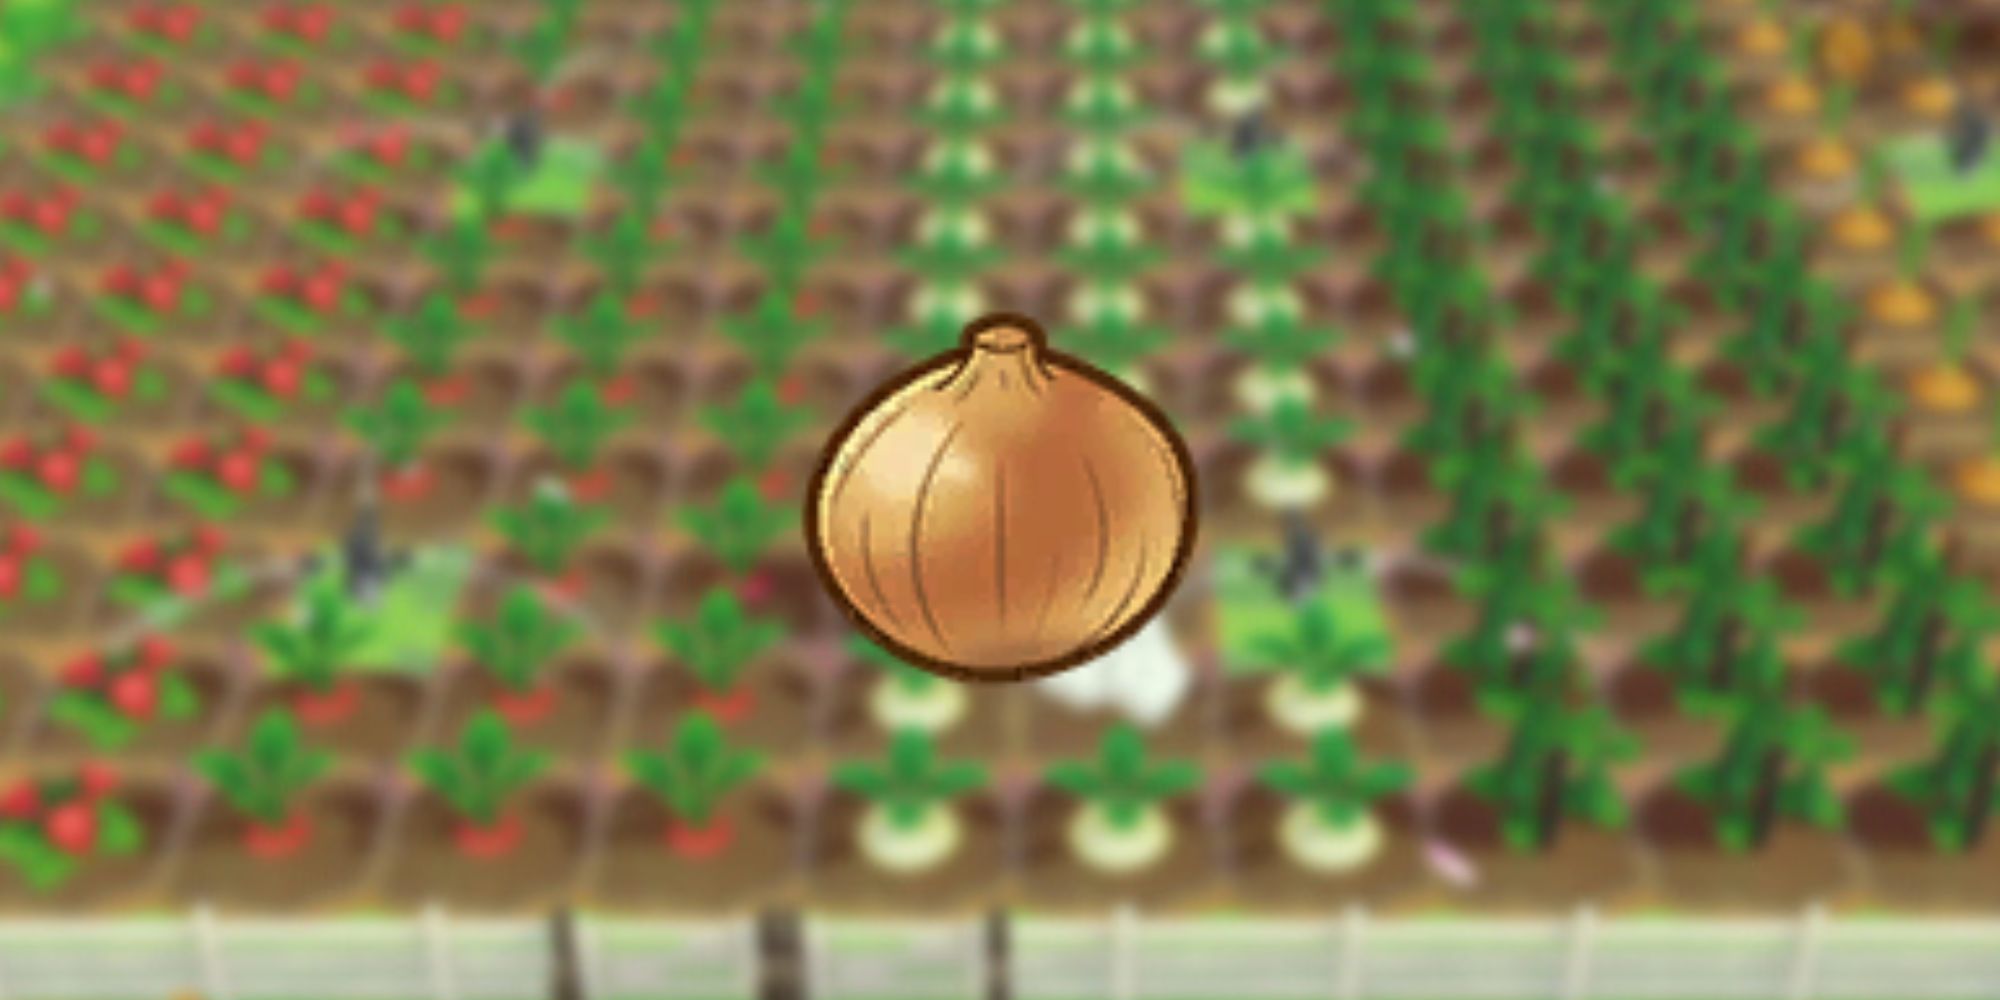 Onion icon as it would be seen in players inventory over blurred background of crops in game